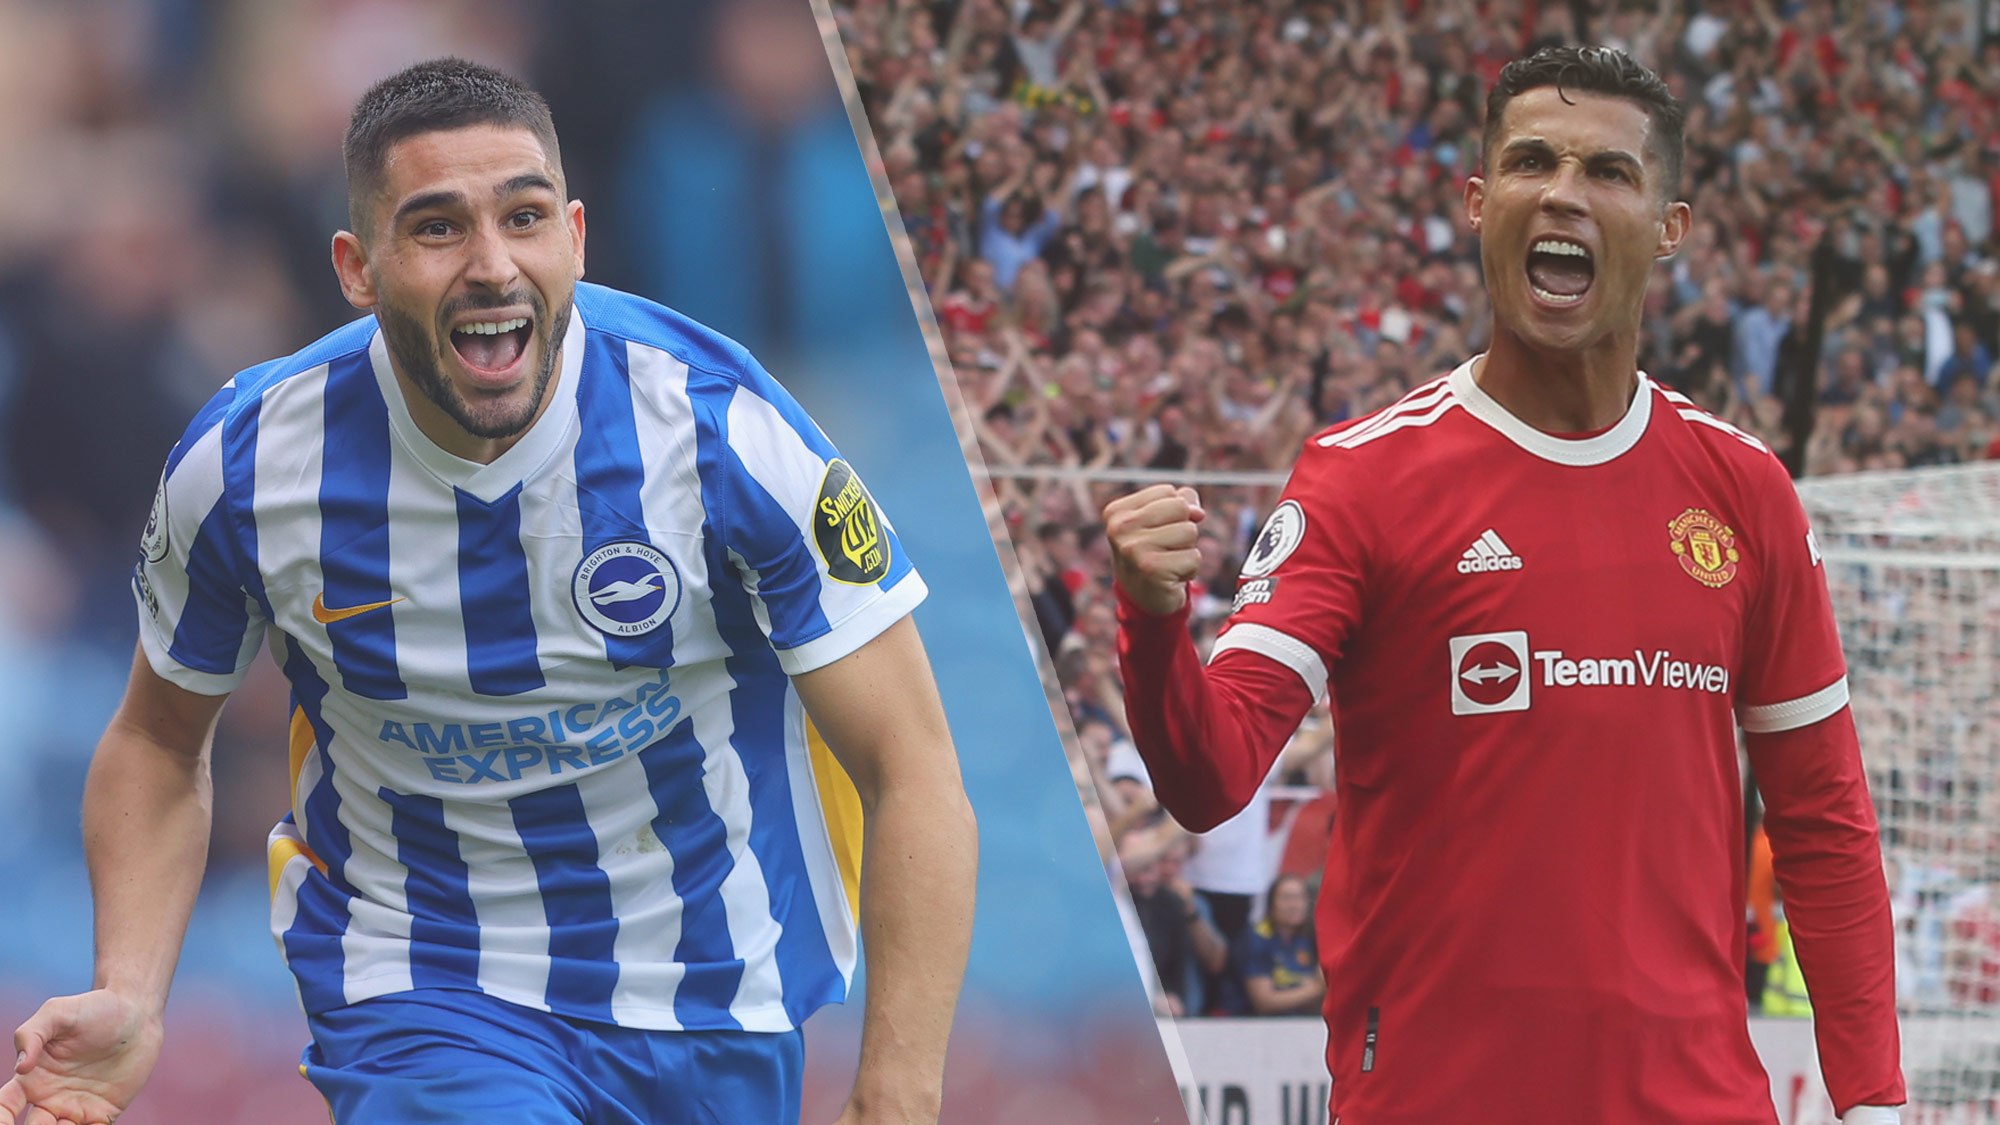 Brighton's Neal Maupay and Manchester United's Cristiano Ronaldo could be featured in the Brighton v Manchester United live stream